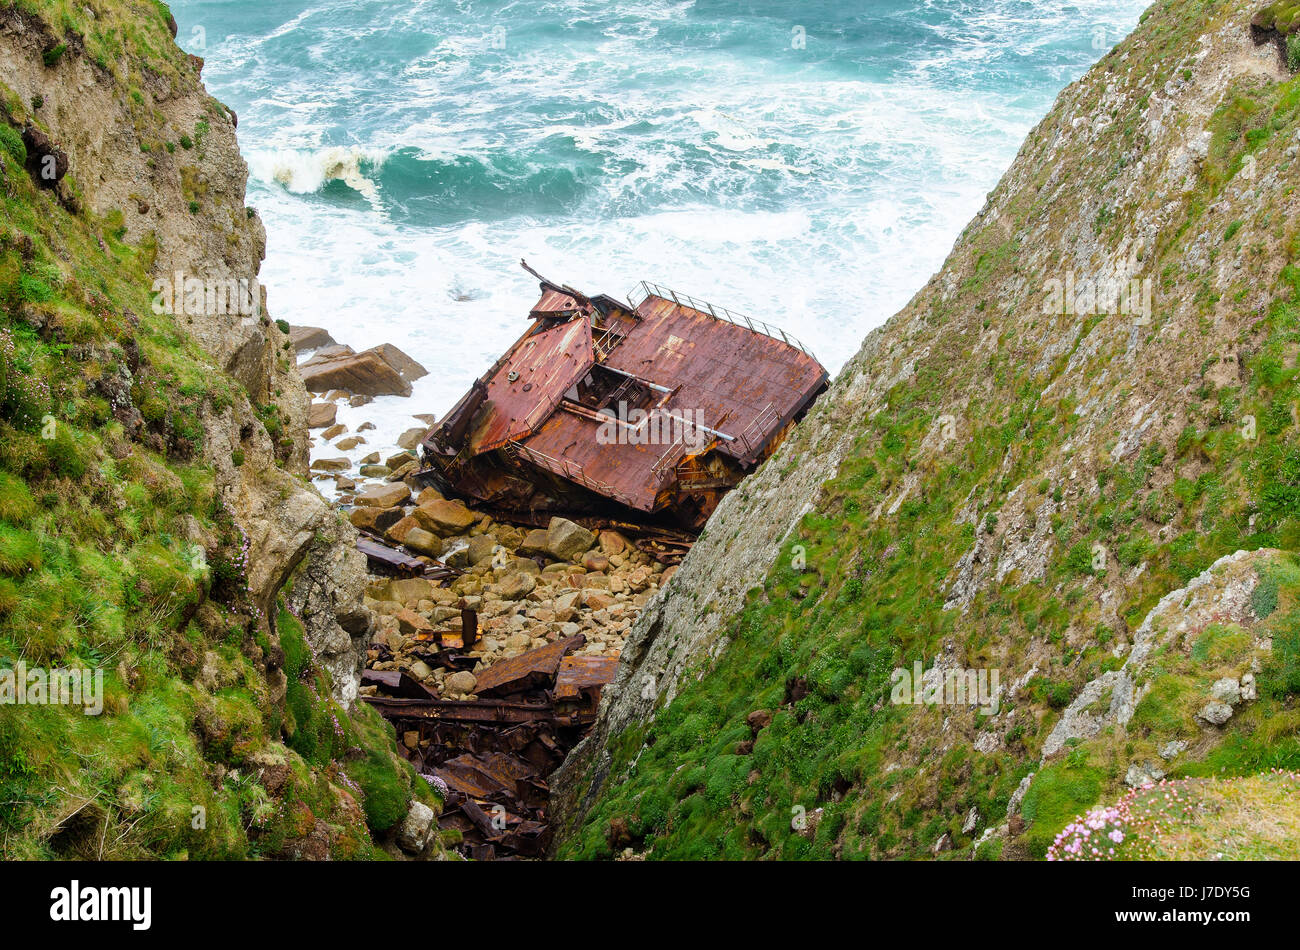 The wreck of RMS Mulheim in Castle Zawn between Sennen Cove and Lands End, Cornwall, UK. The shipwreck occurred on 22 March 2003. Stock Photo